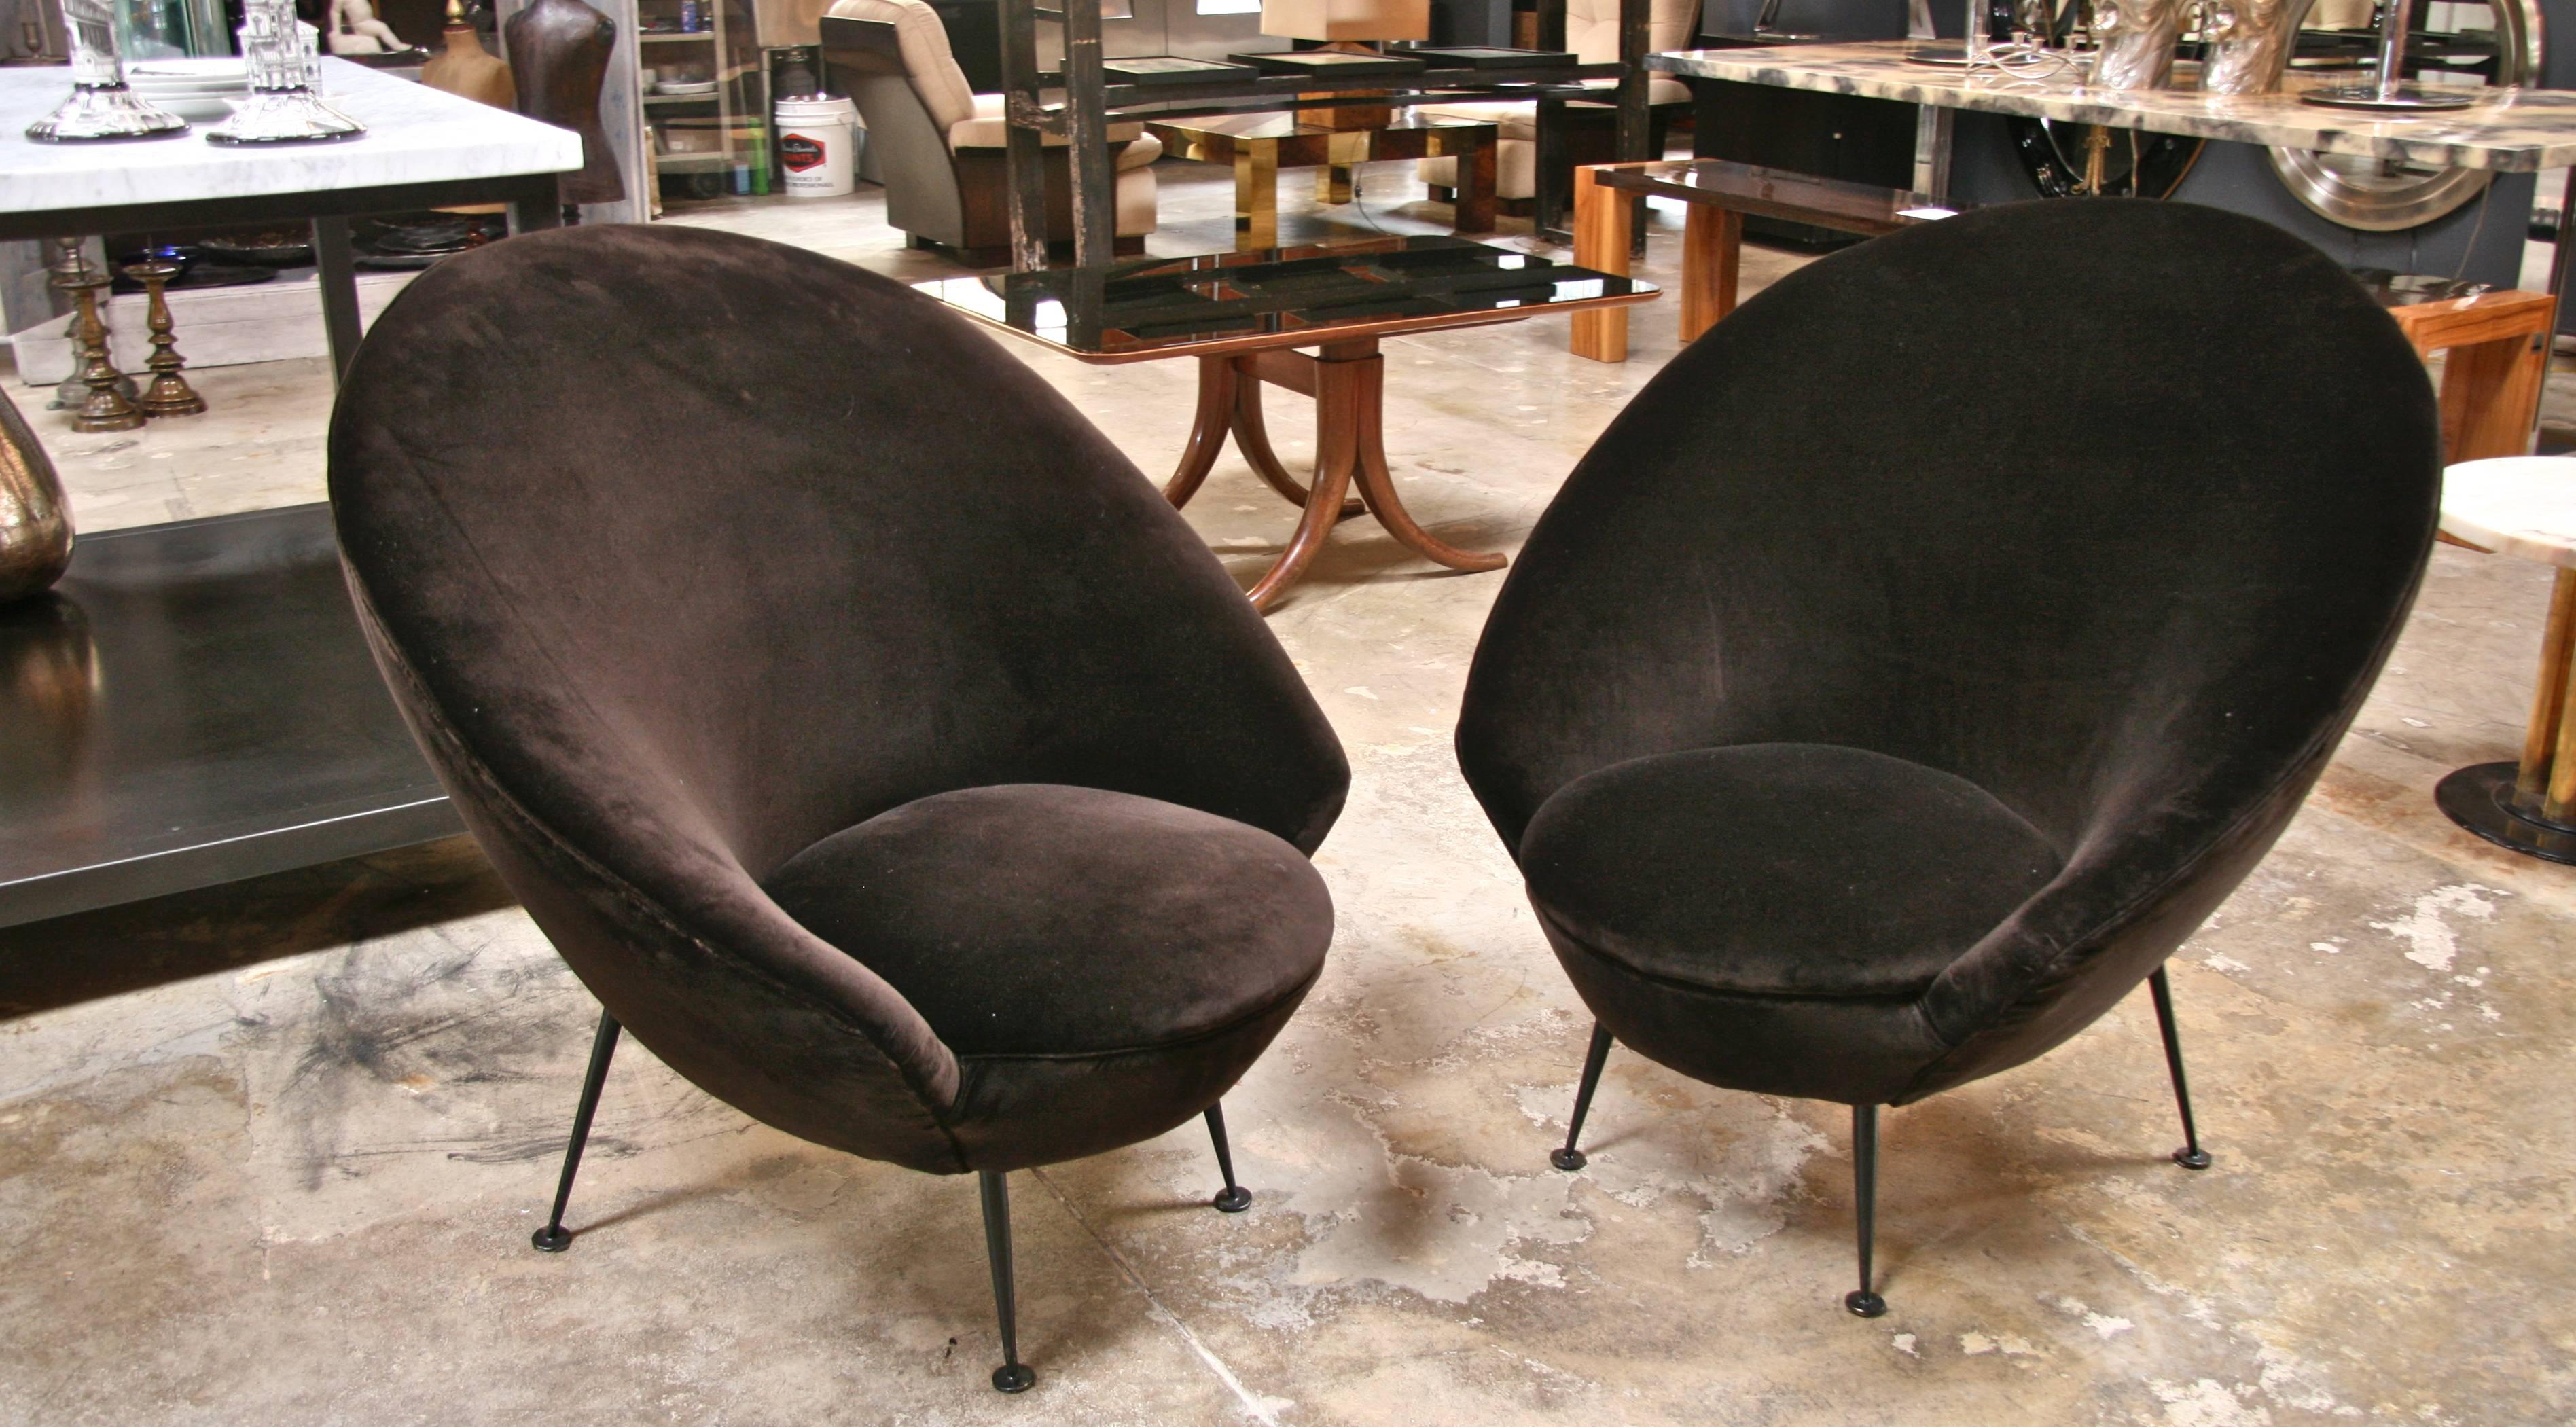 What came first, the egg chairs or Parisi....? gorgeous Italian design at its best.